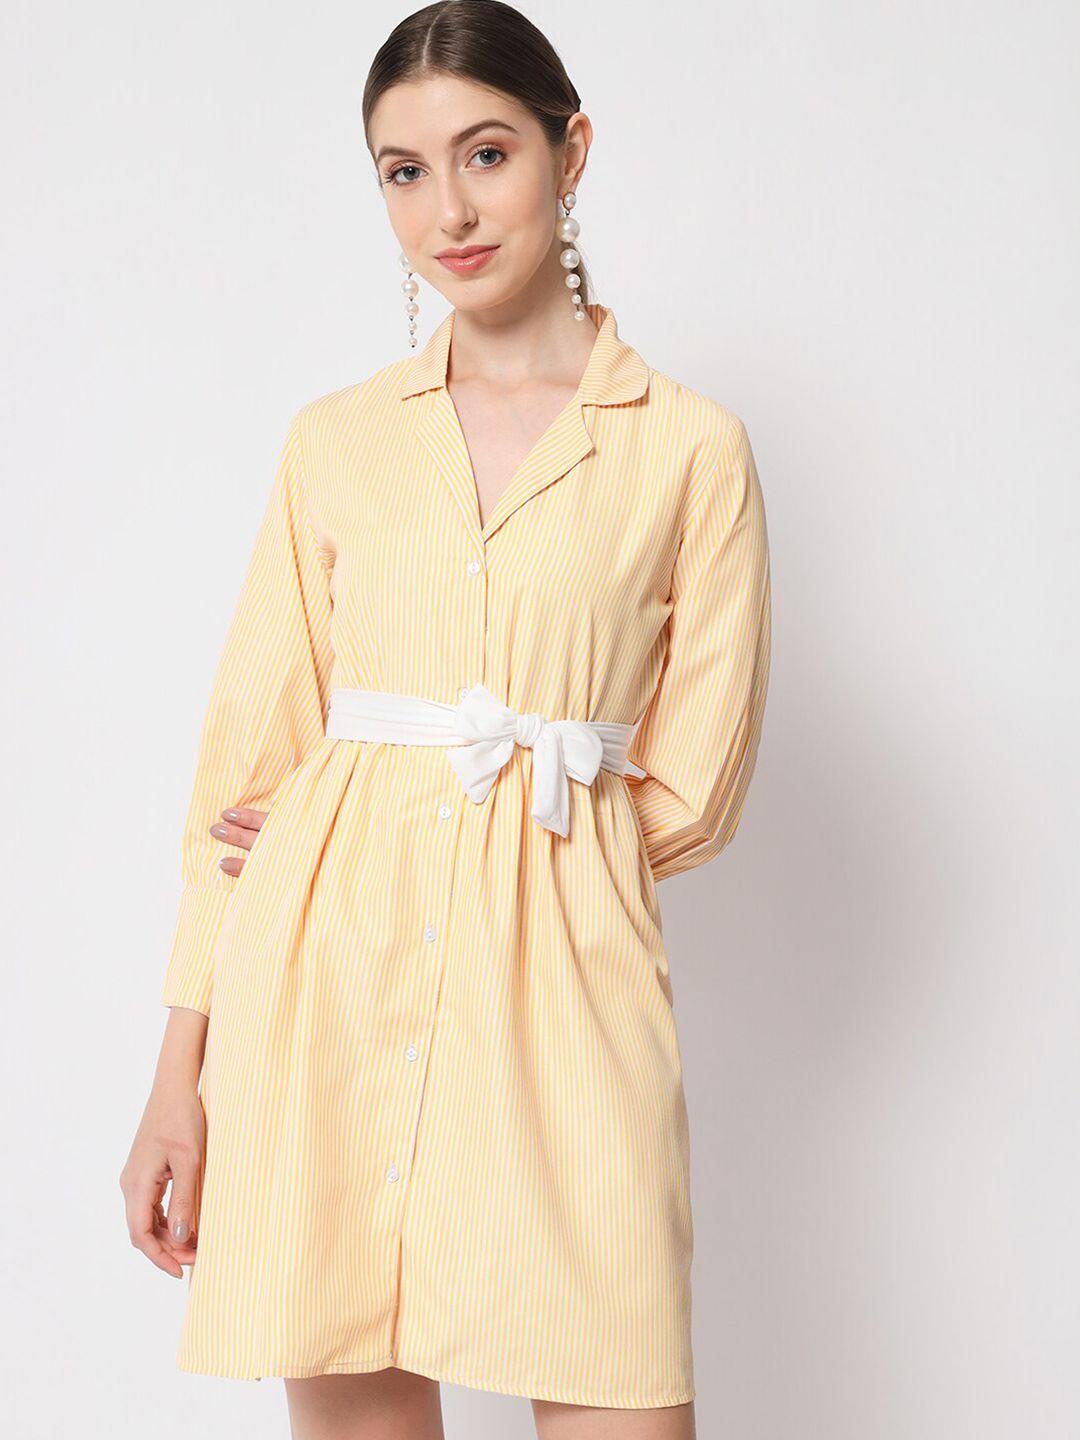 orchid hues cuffed sleeve striped cotton shirt dress